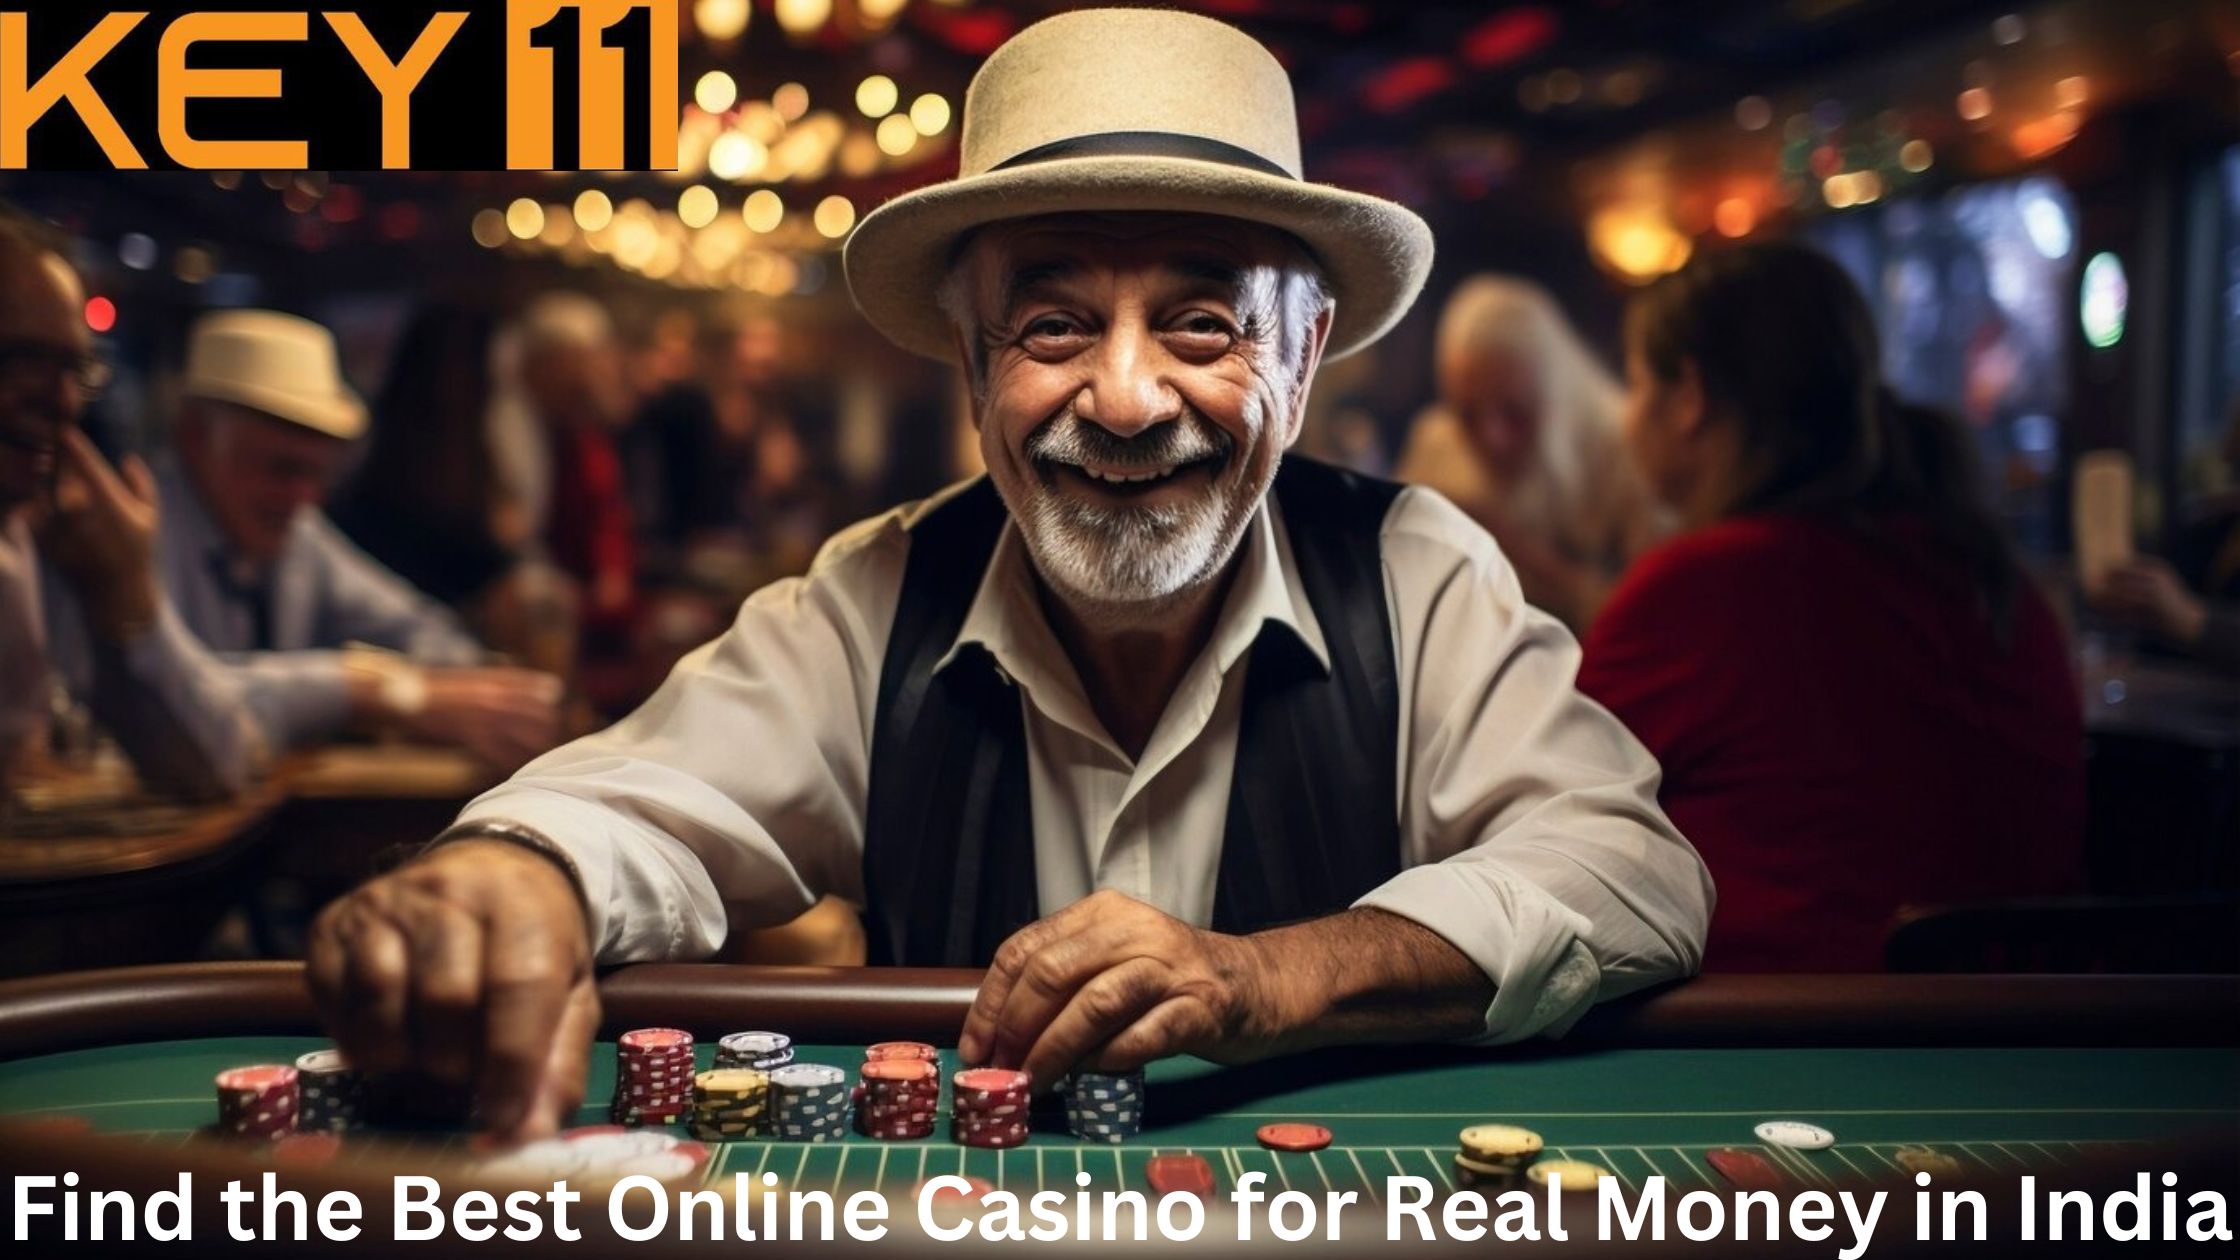 Find the Best Online Casino for Real Money in India